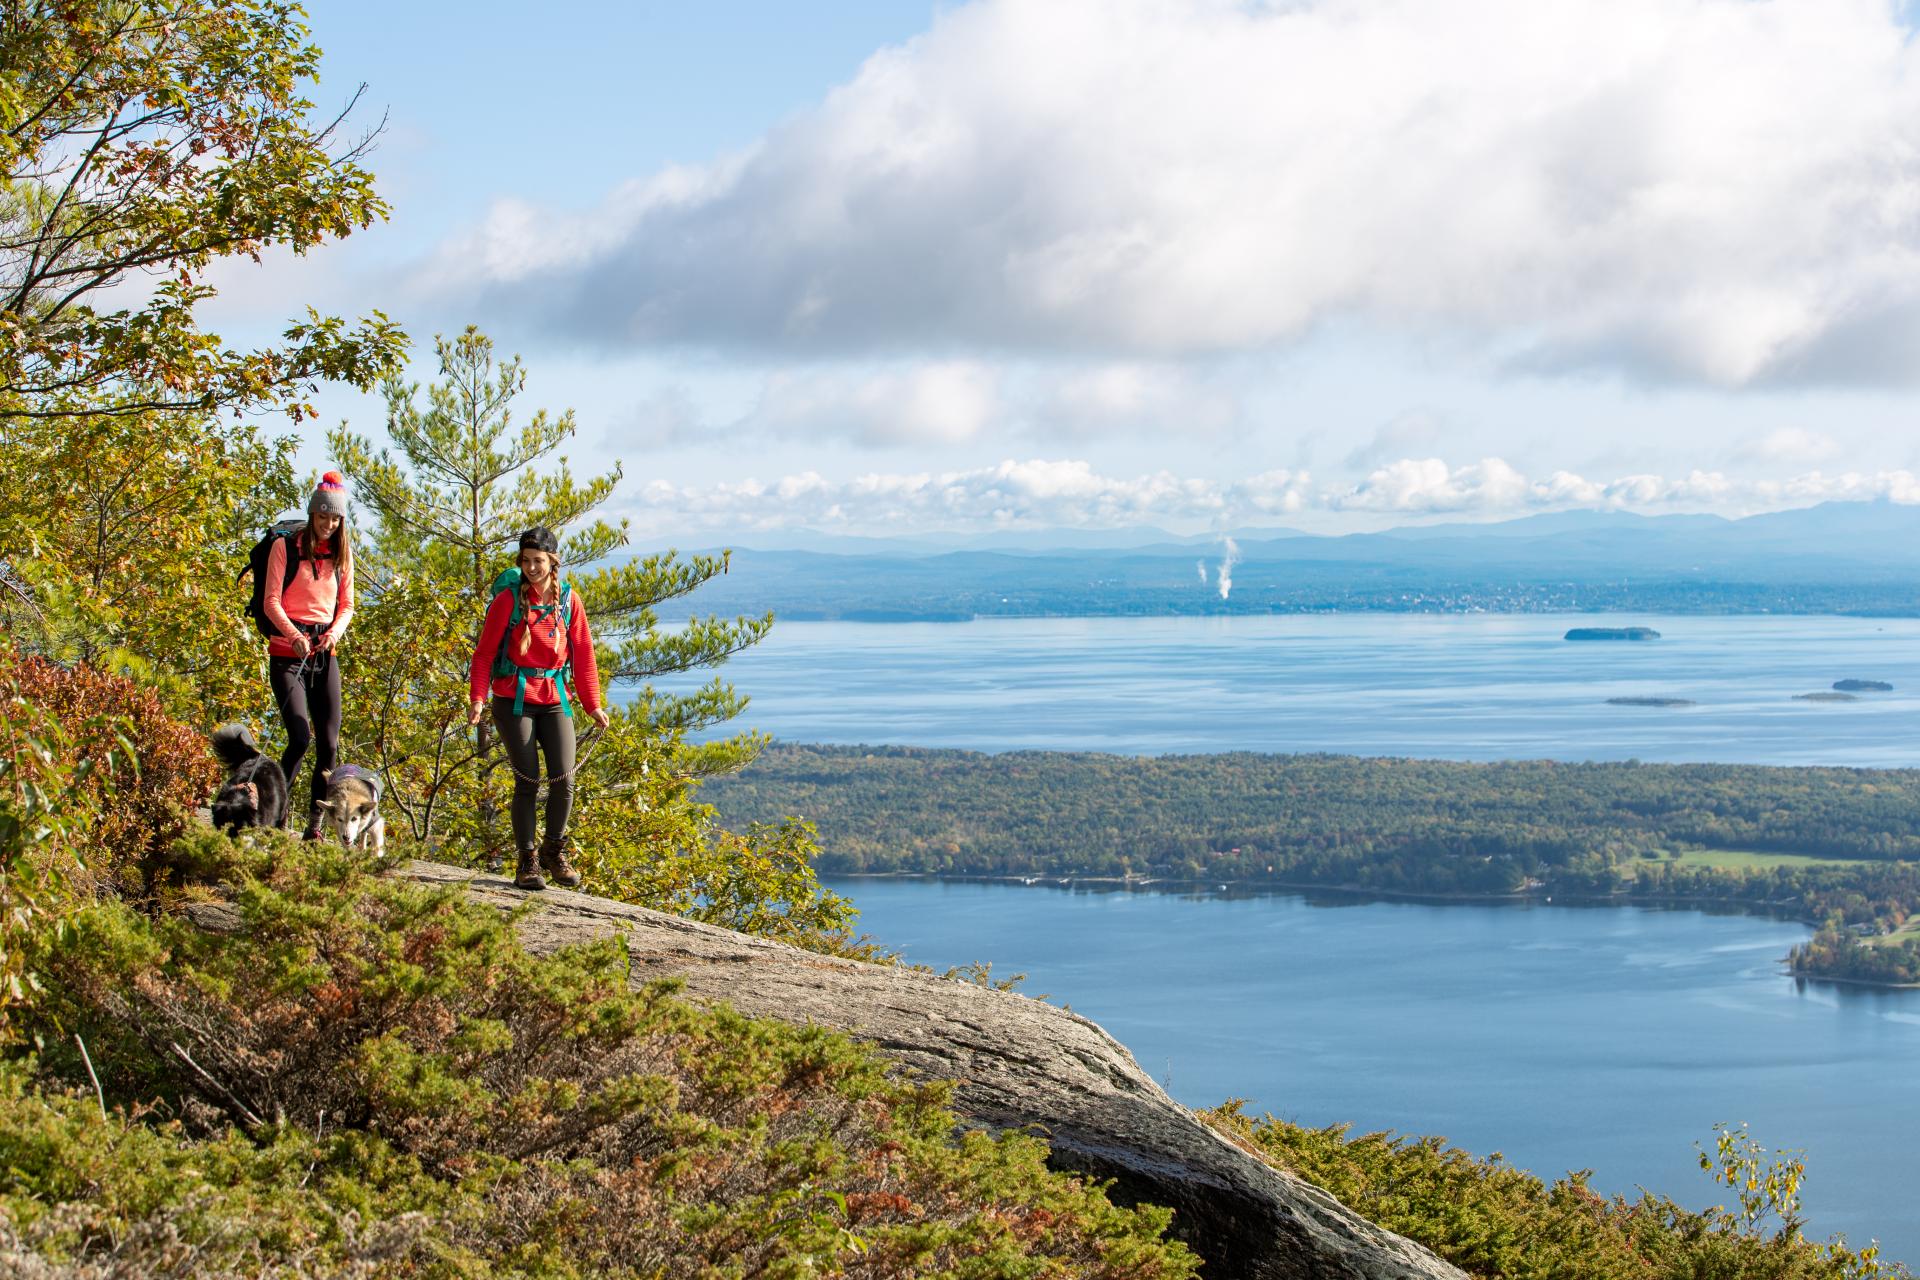 Rattlesnake Mountain is a short hike to an amazing view.